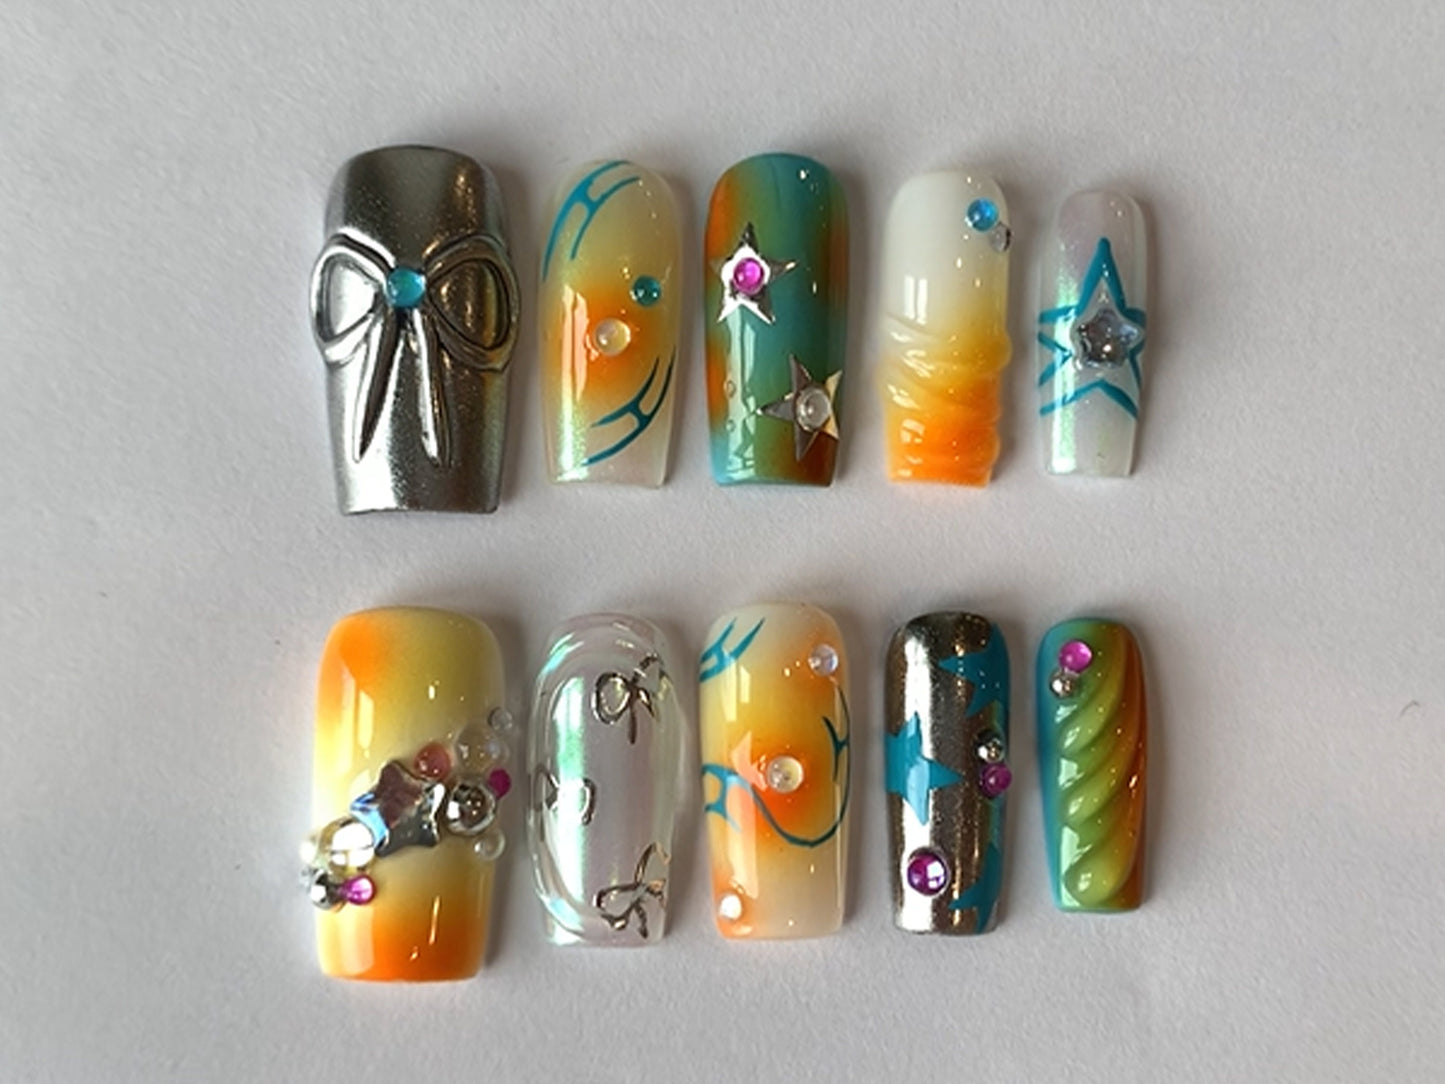 Elegant Orange Press On Nails | Y2k-Inspired Press On Nails| Orange and Green with Unique Chrome Designs | Gift For Her | J123